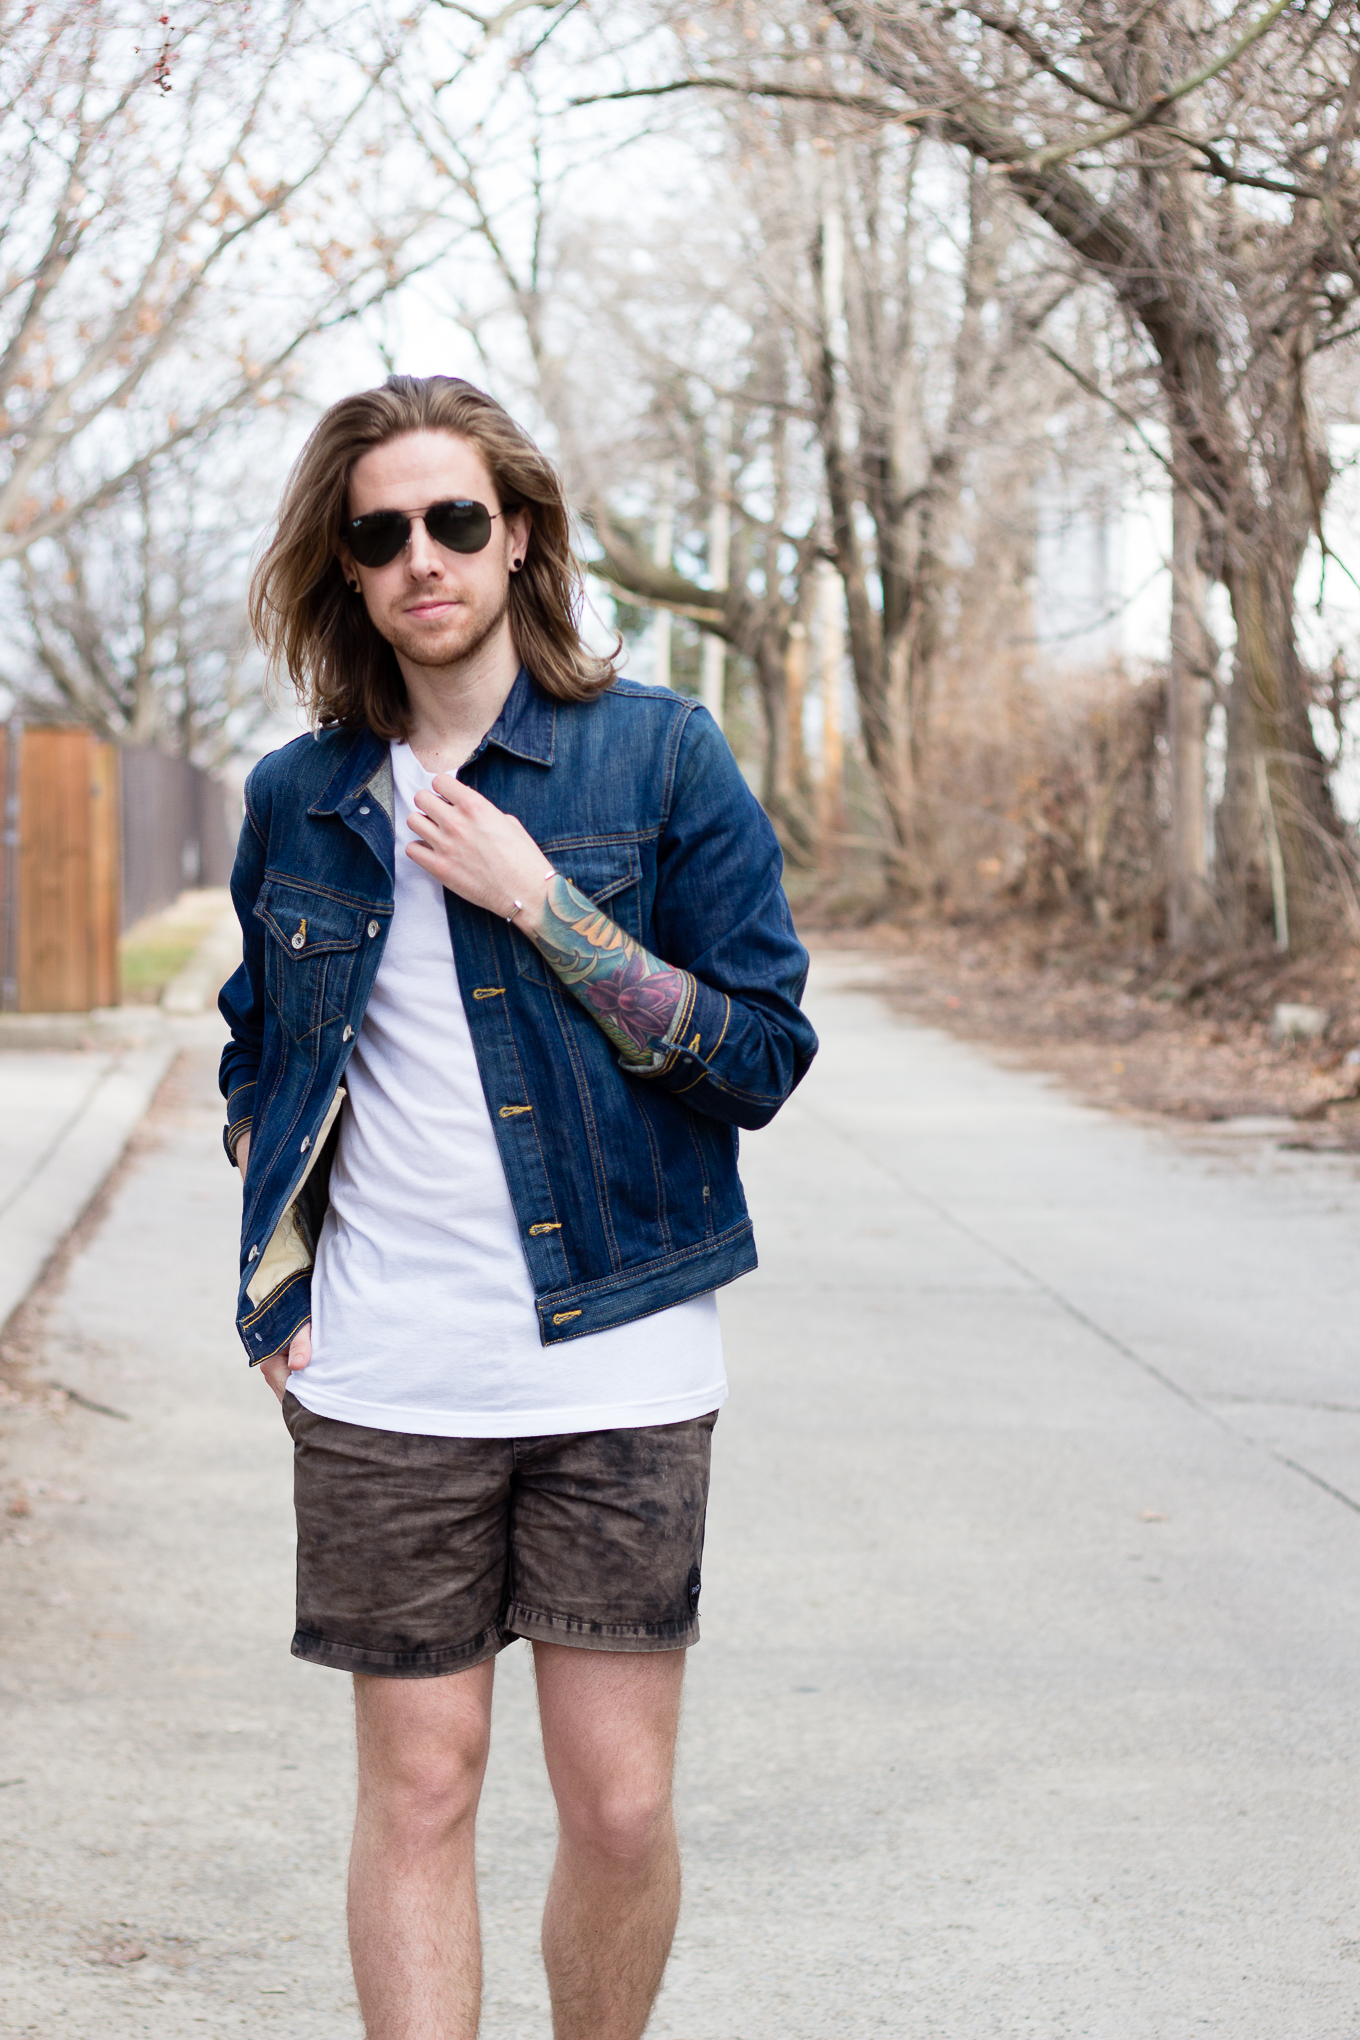 Big Star Denim Jacket and RVCA Shorts worn by The Kentucky Gent